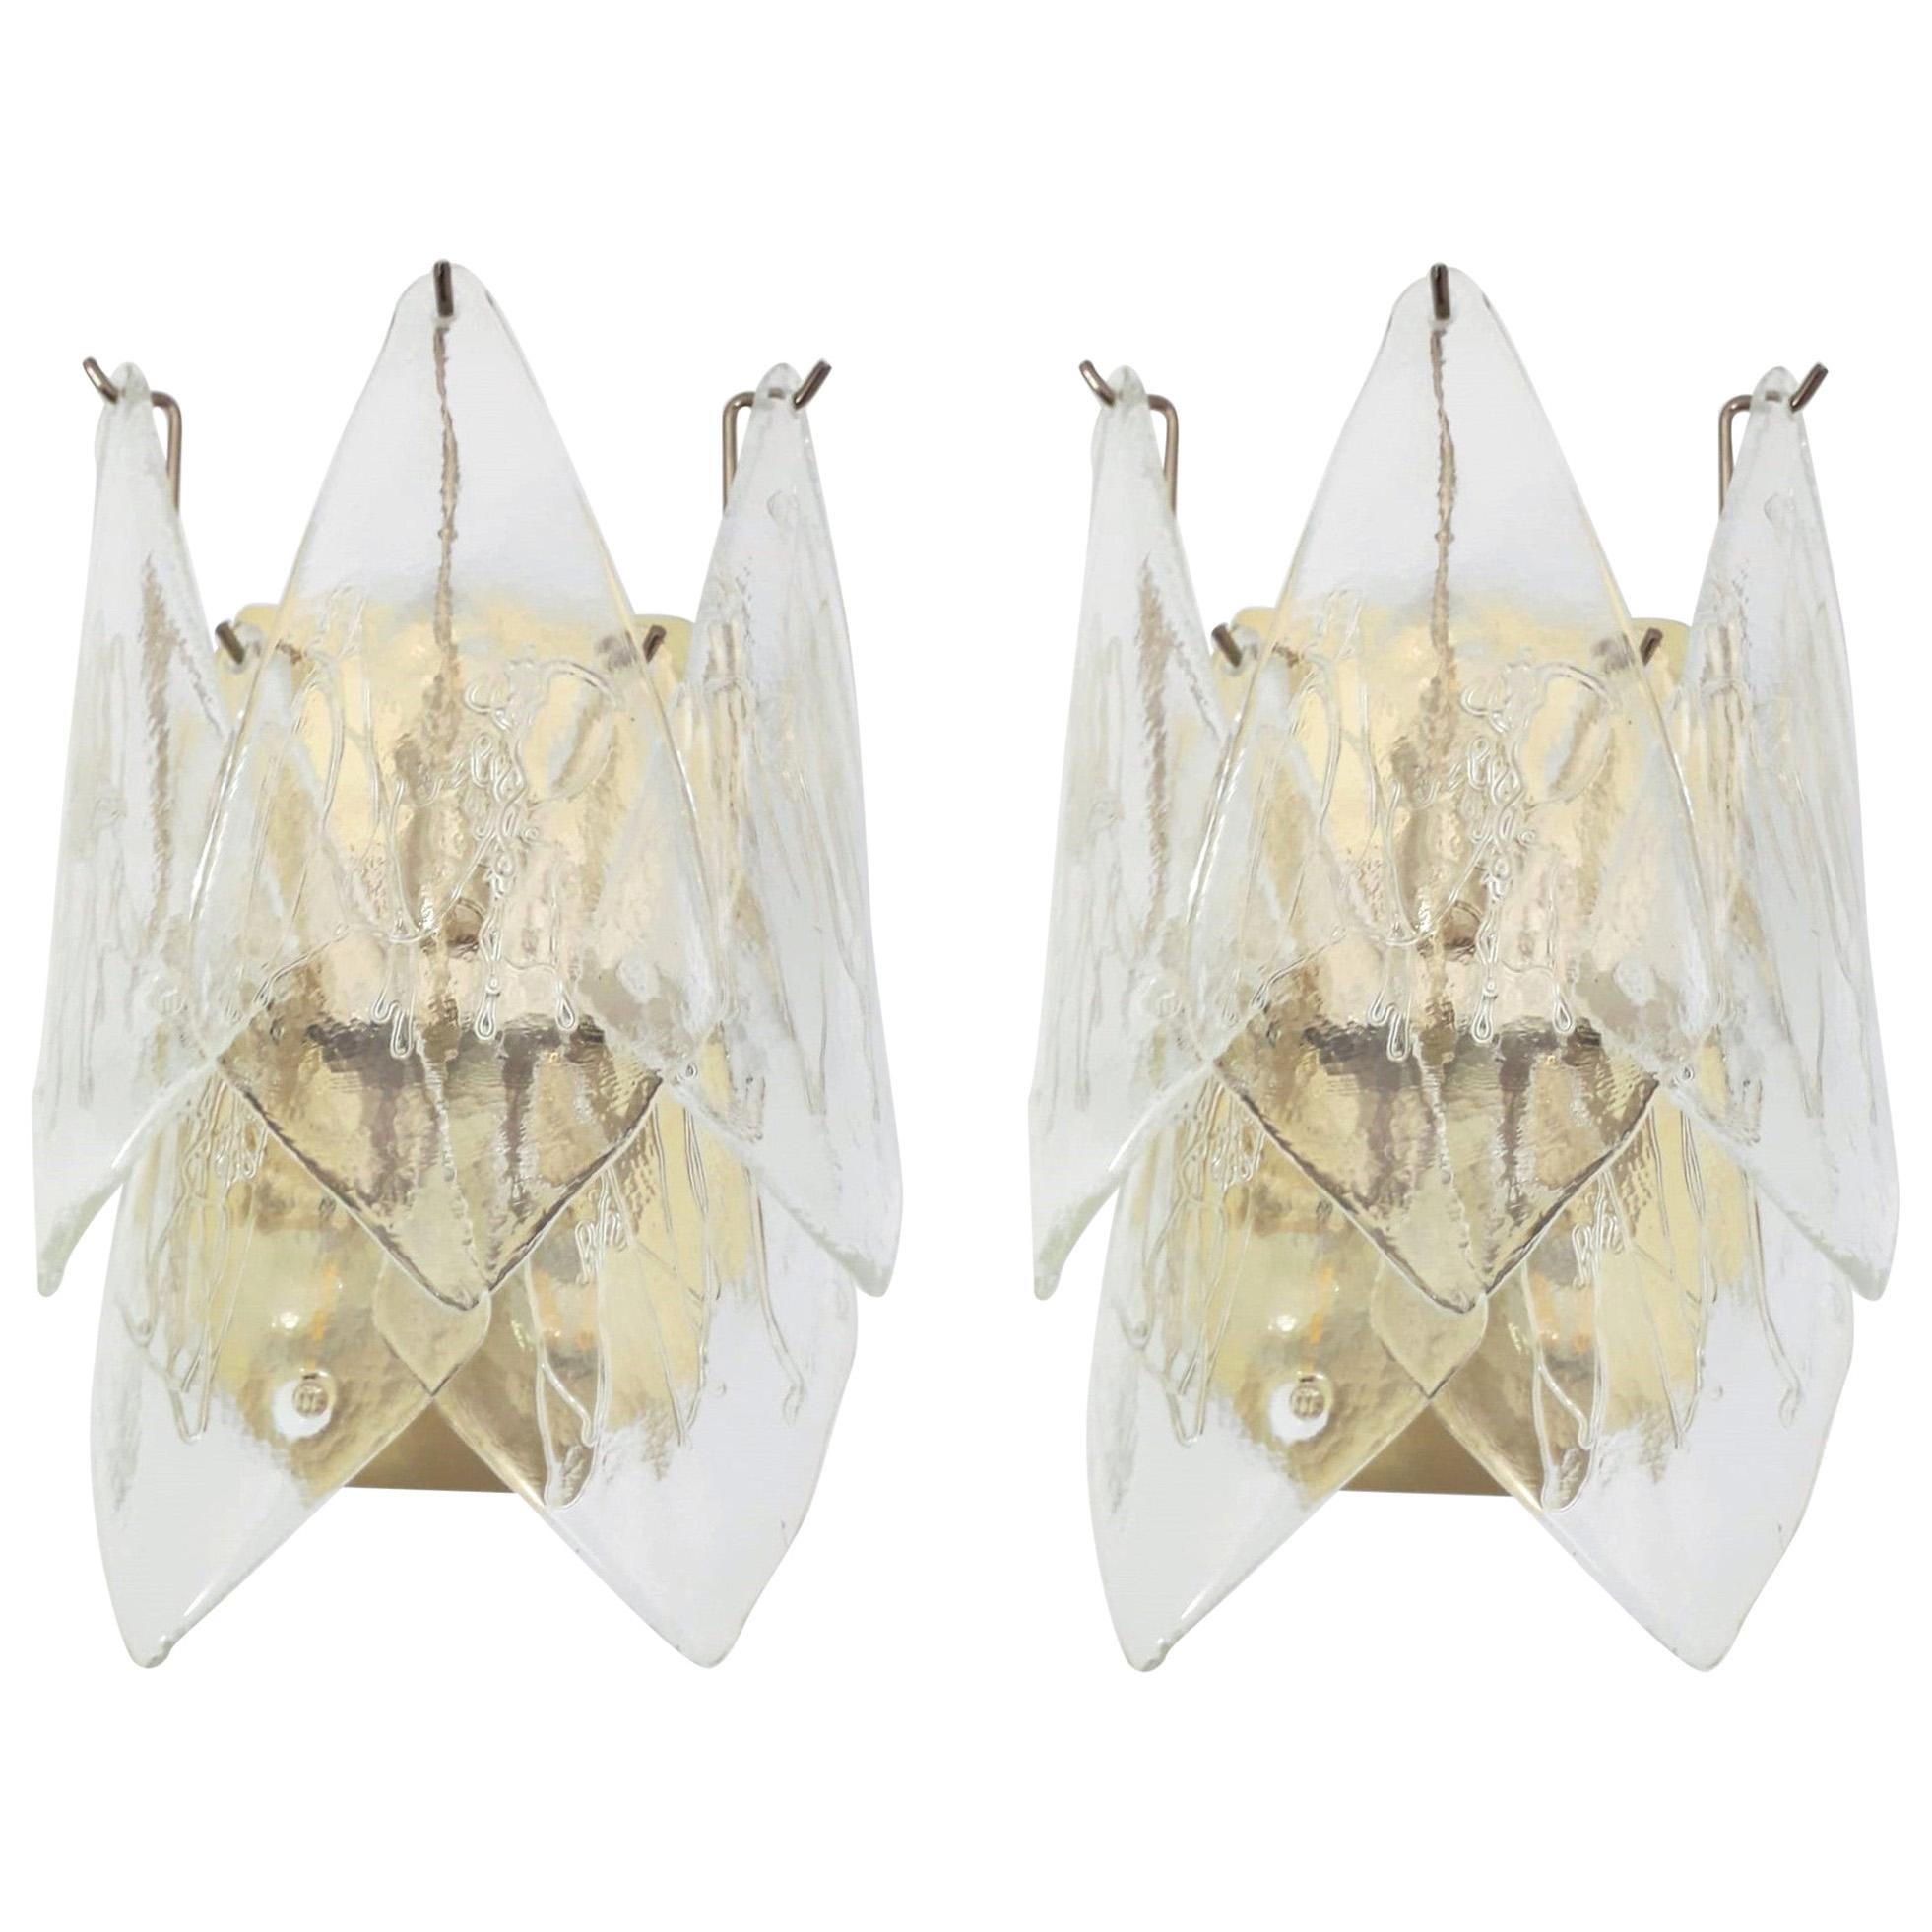 Pair of "Vele" Sconces by La Murrina, 2 Pairs Available